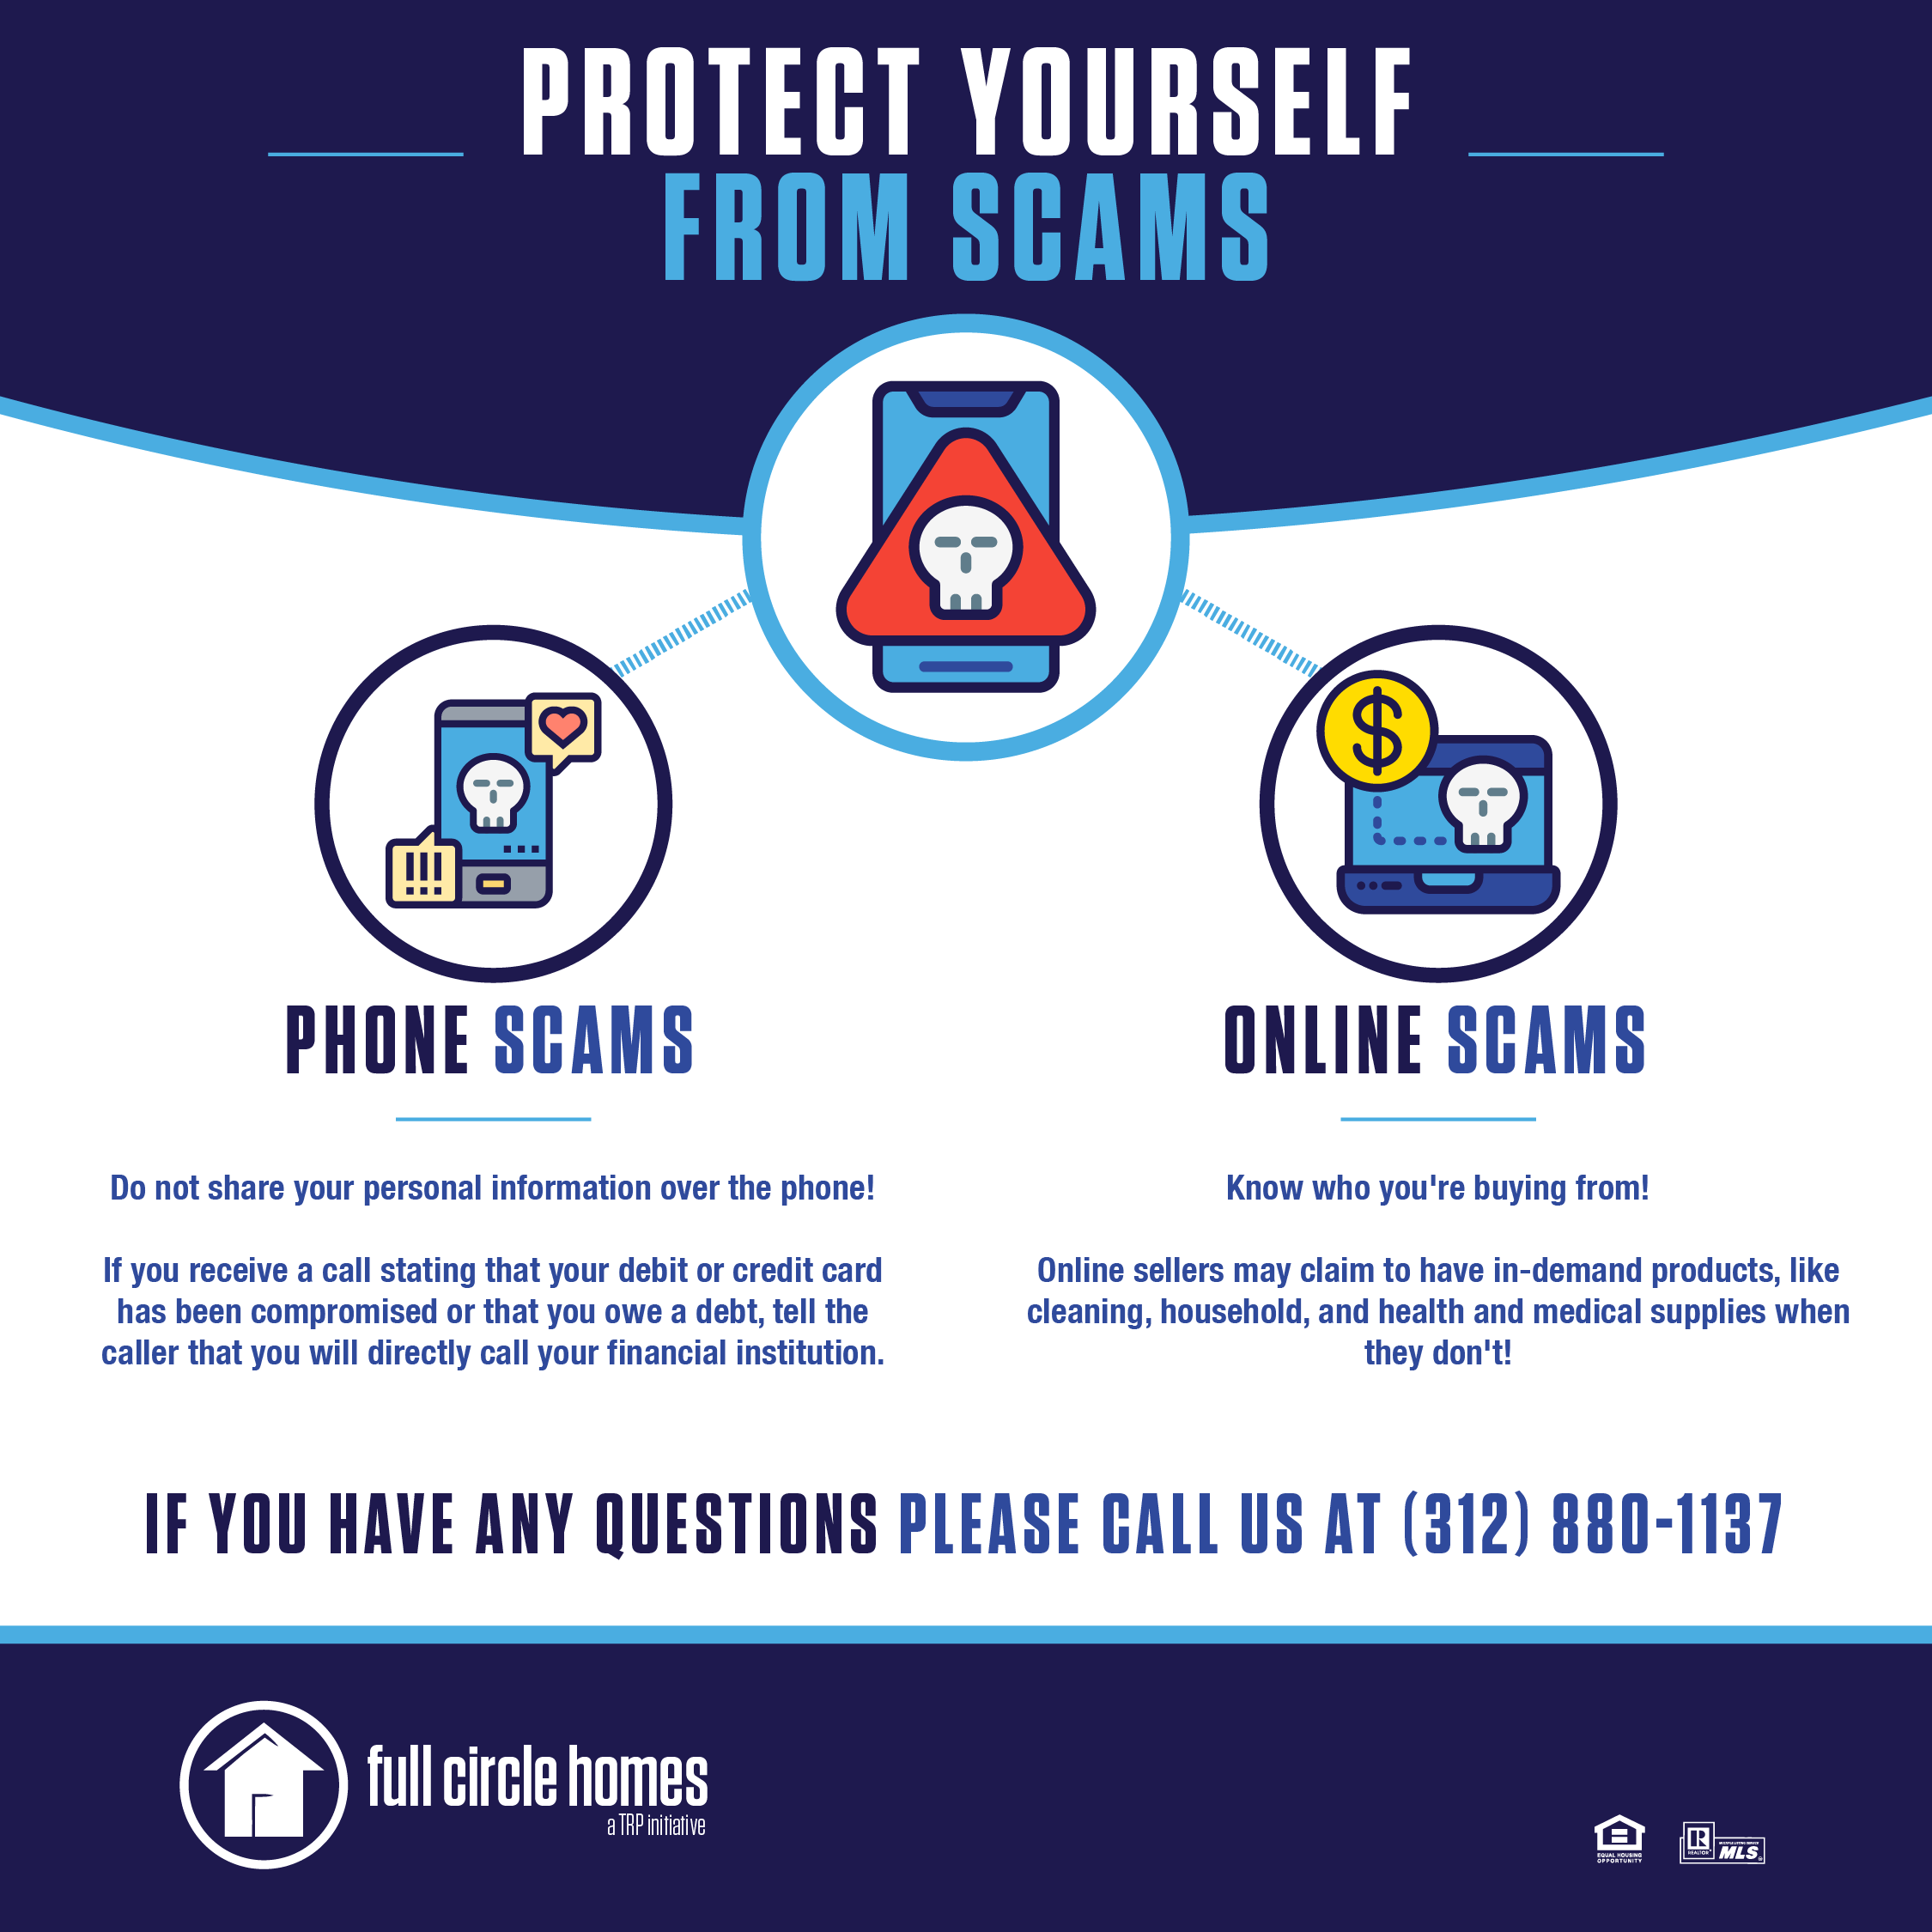 FCH Protect Yourself From Scams 01 1